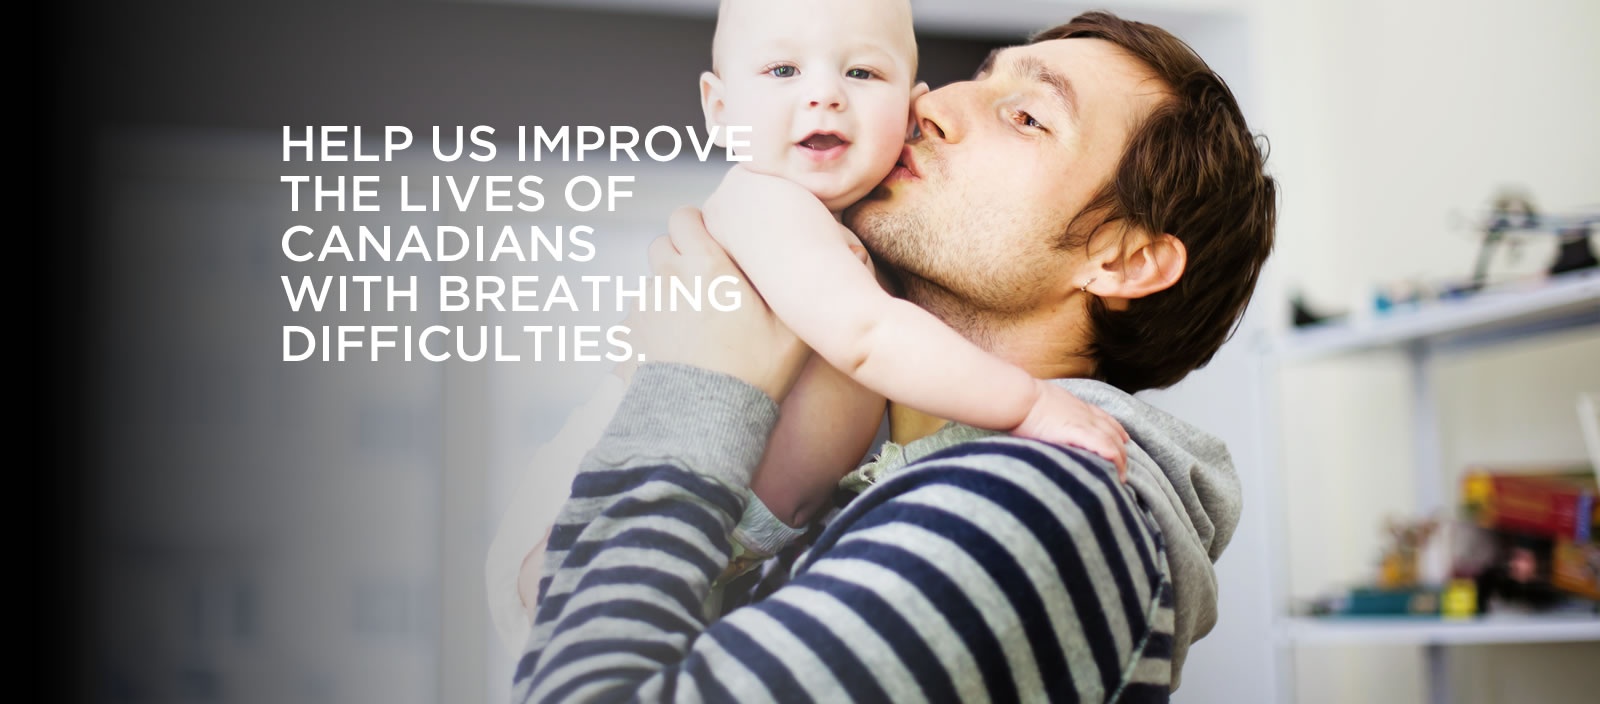 Help us improve the lives of Canadians with breathing difficulties.